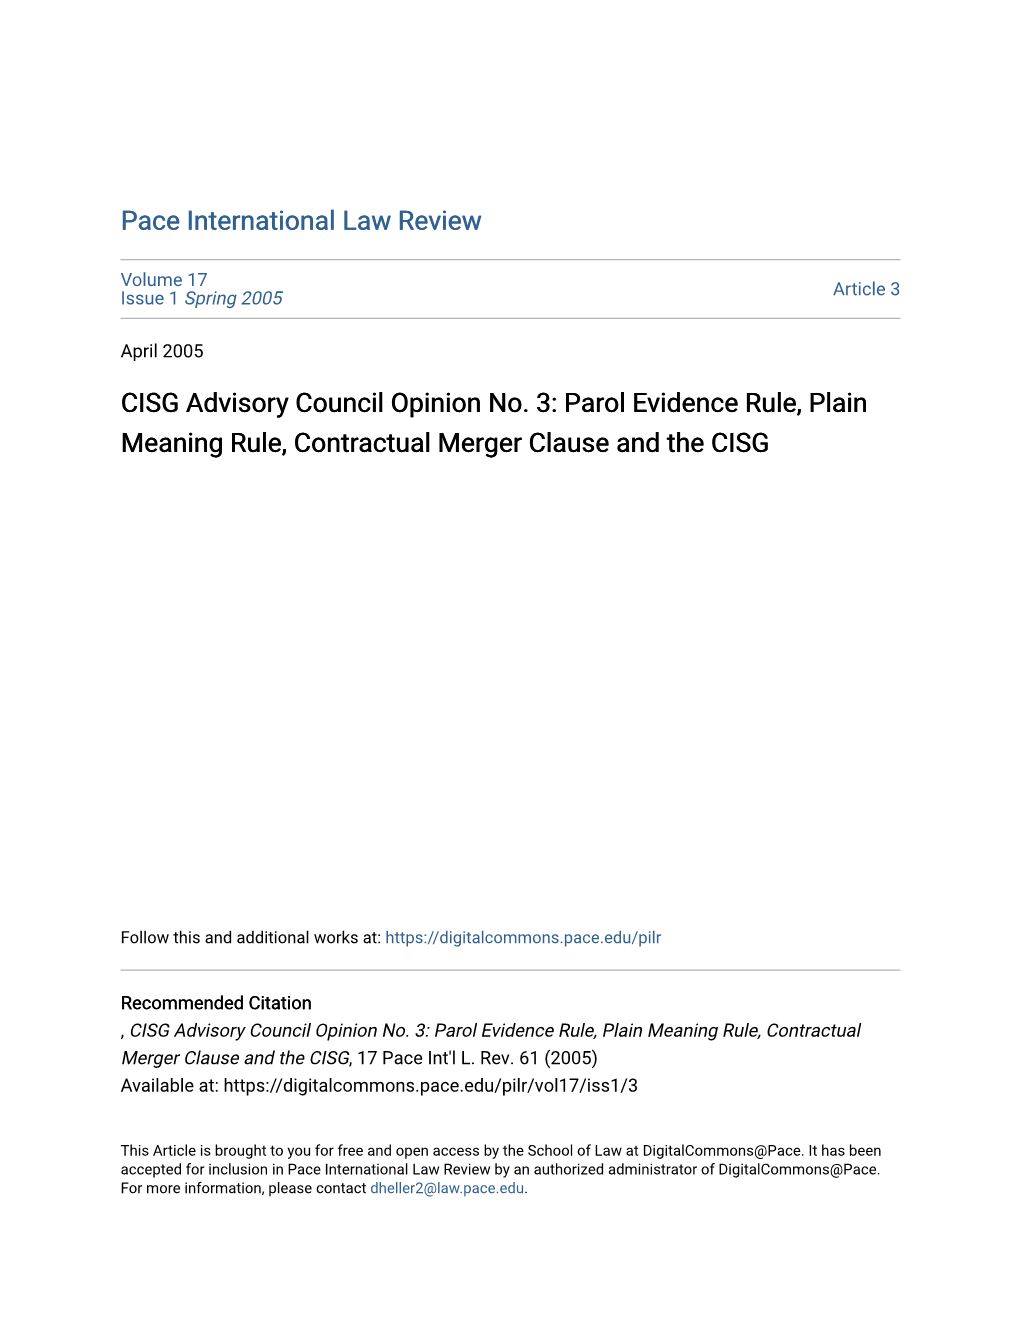 CISG Advisory Council Opinion No. 3: Parol Evidence Rule, Plain Meaning Rule, Contractual Merger Clause and the CISG